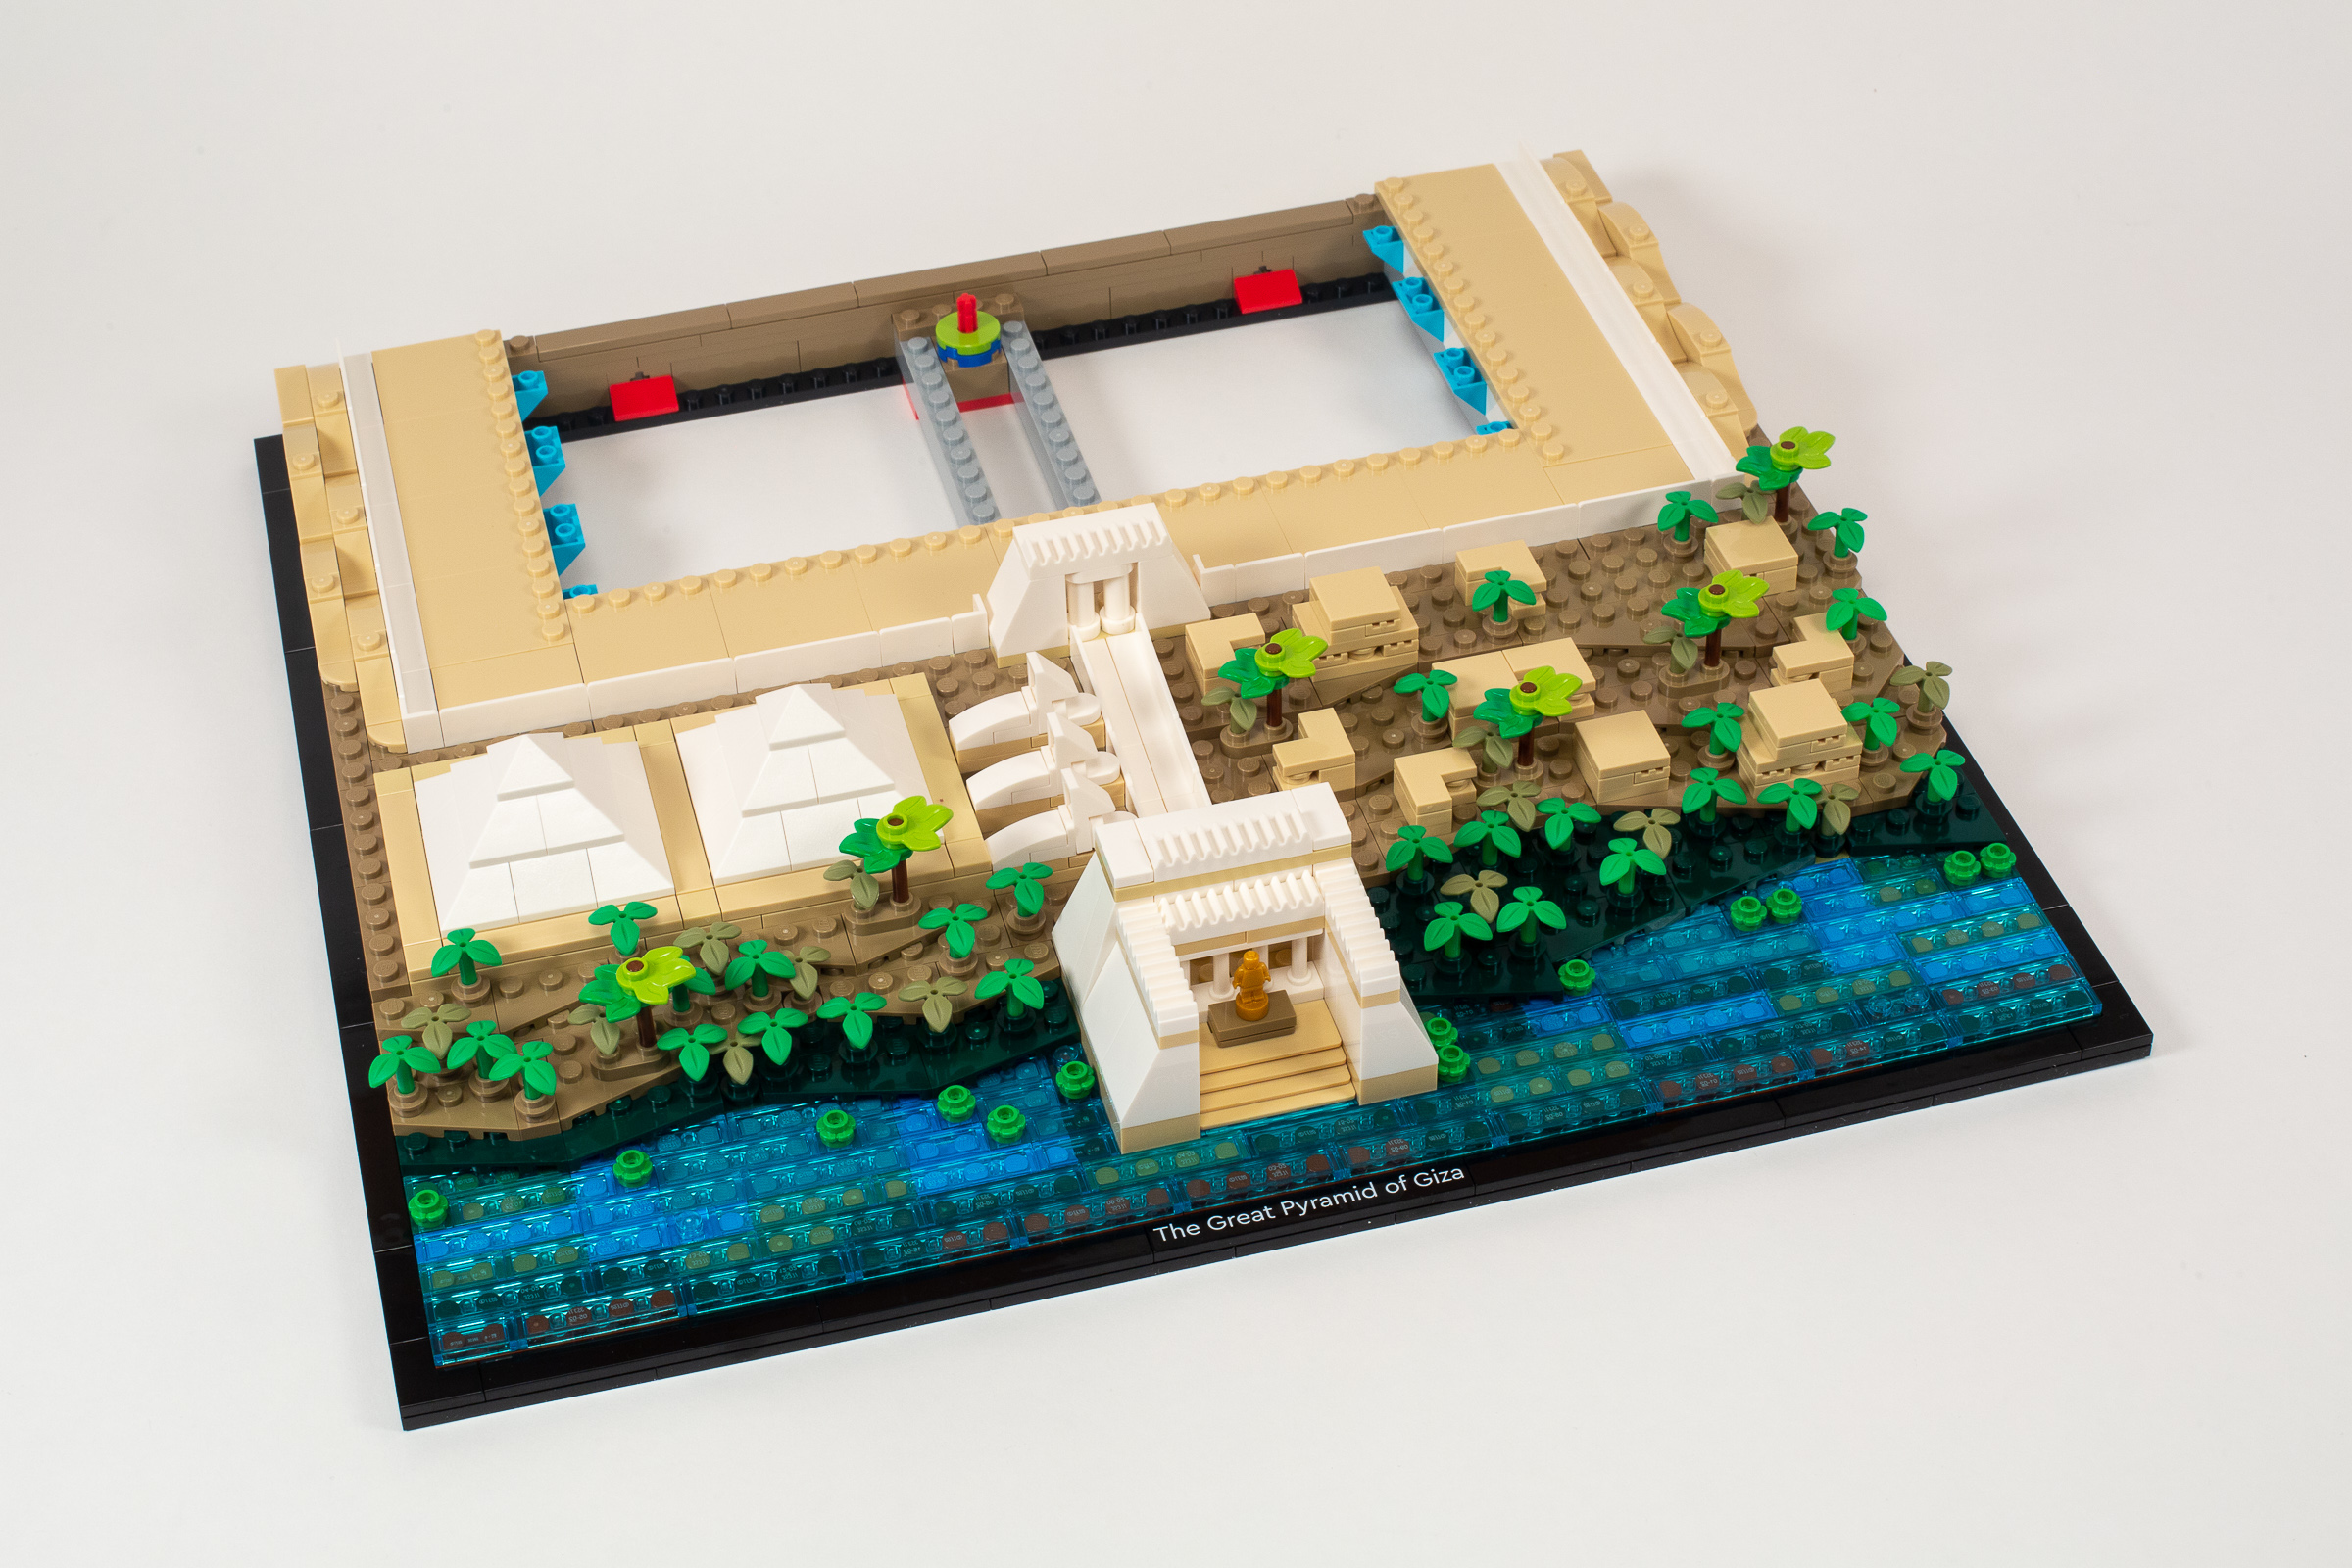 LEGO 21058 The Great Pyramid of Giza review